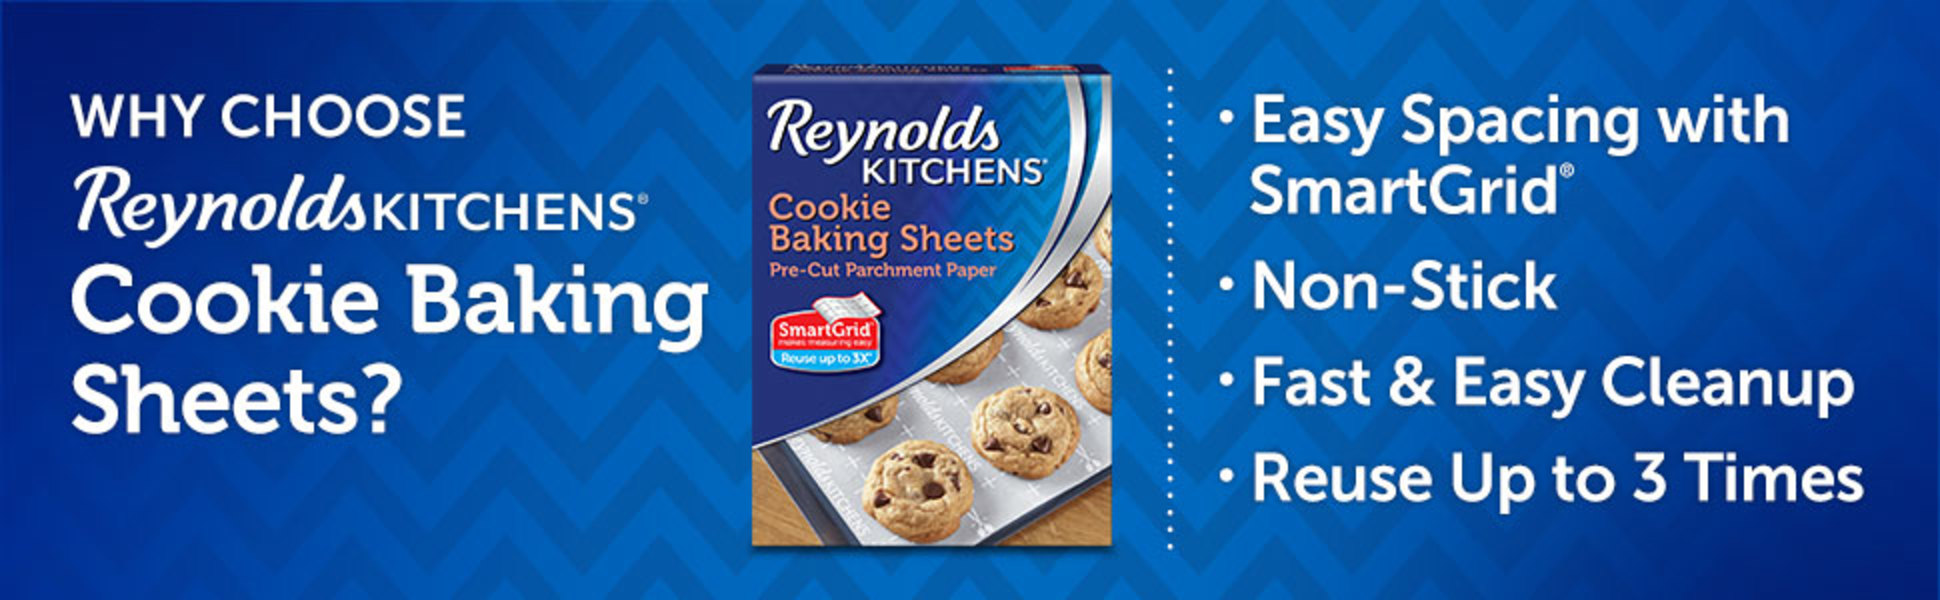  Reynolds Kitchens Cookie Baking Sheets, Pre-Cut